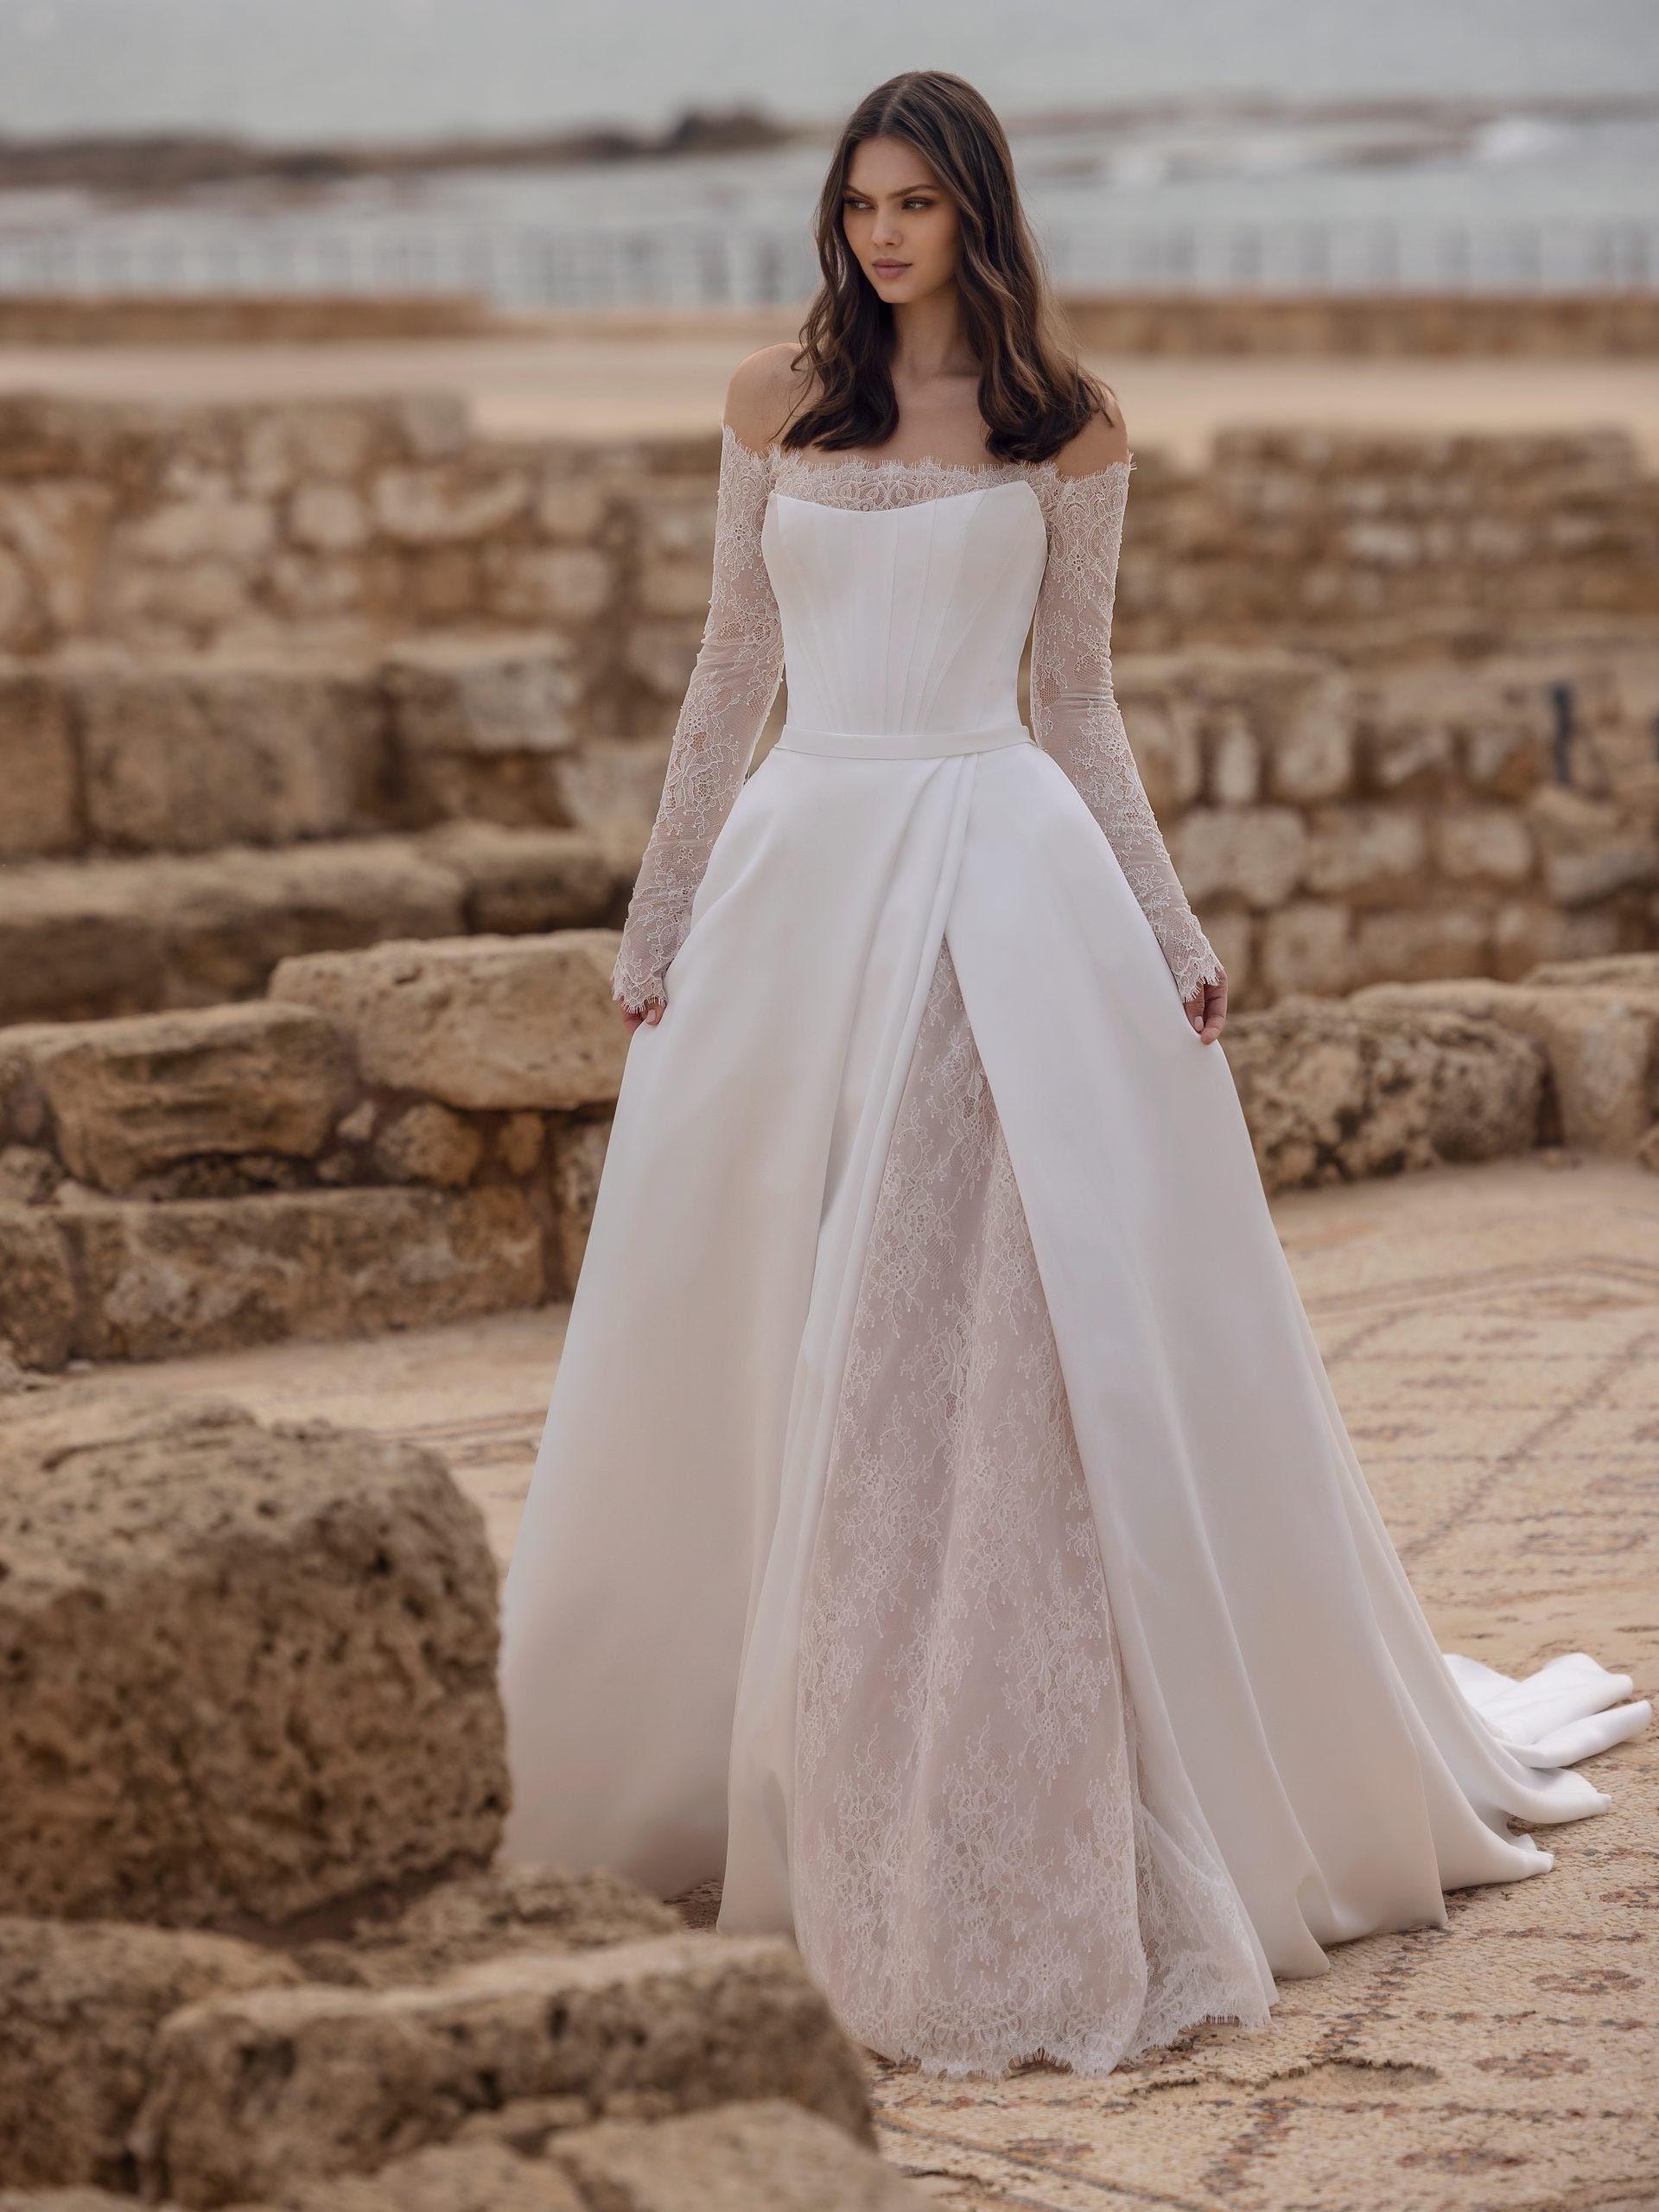 Strapless A-line Wedding Dress With Lace Underlayer by Love by Pnina Tornai